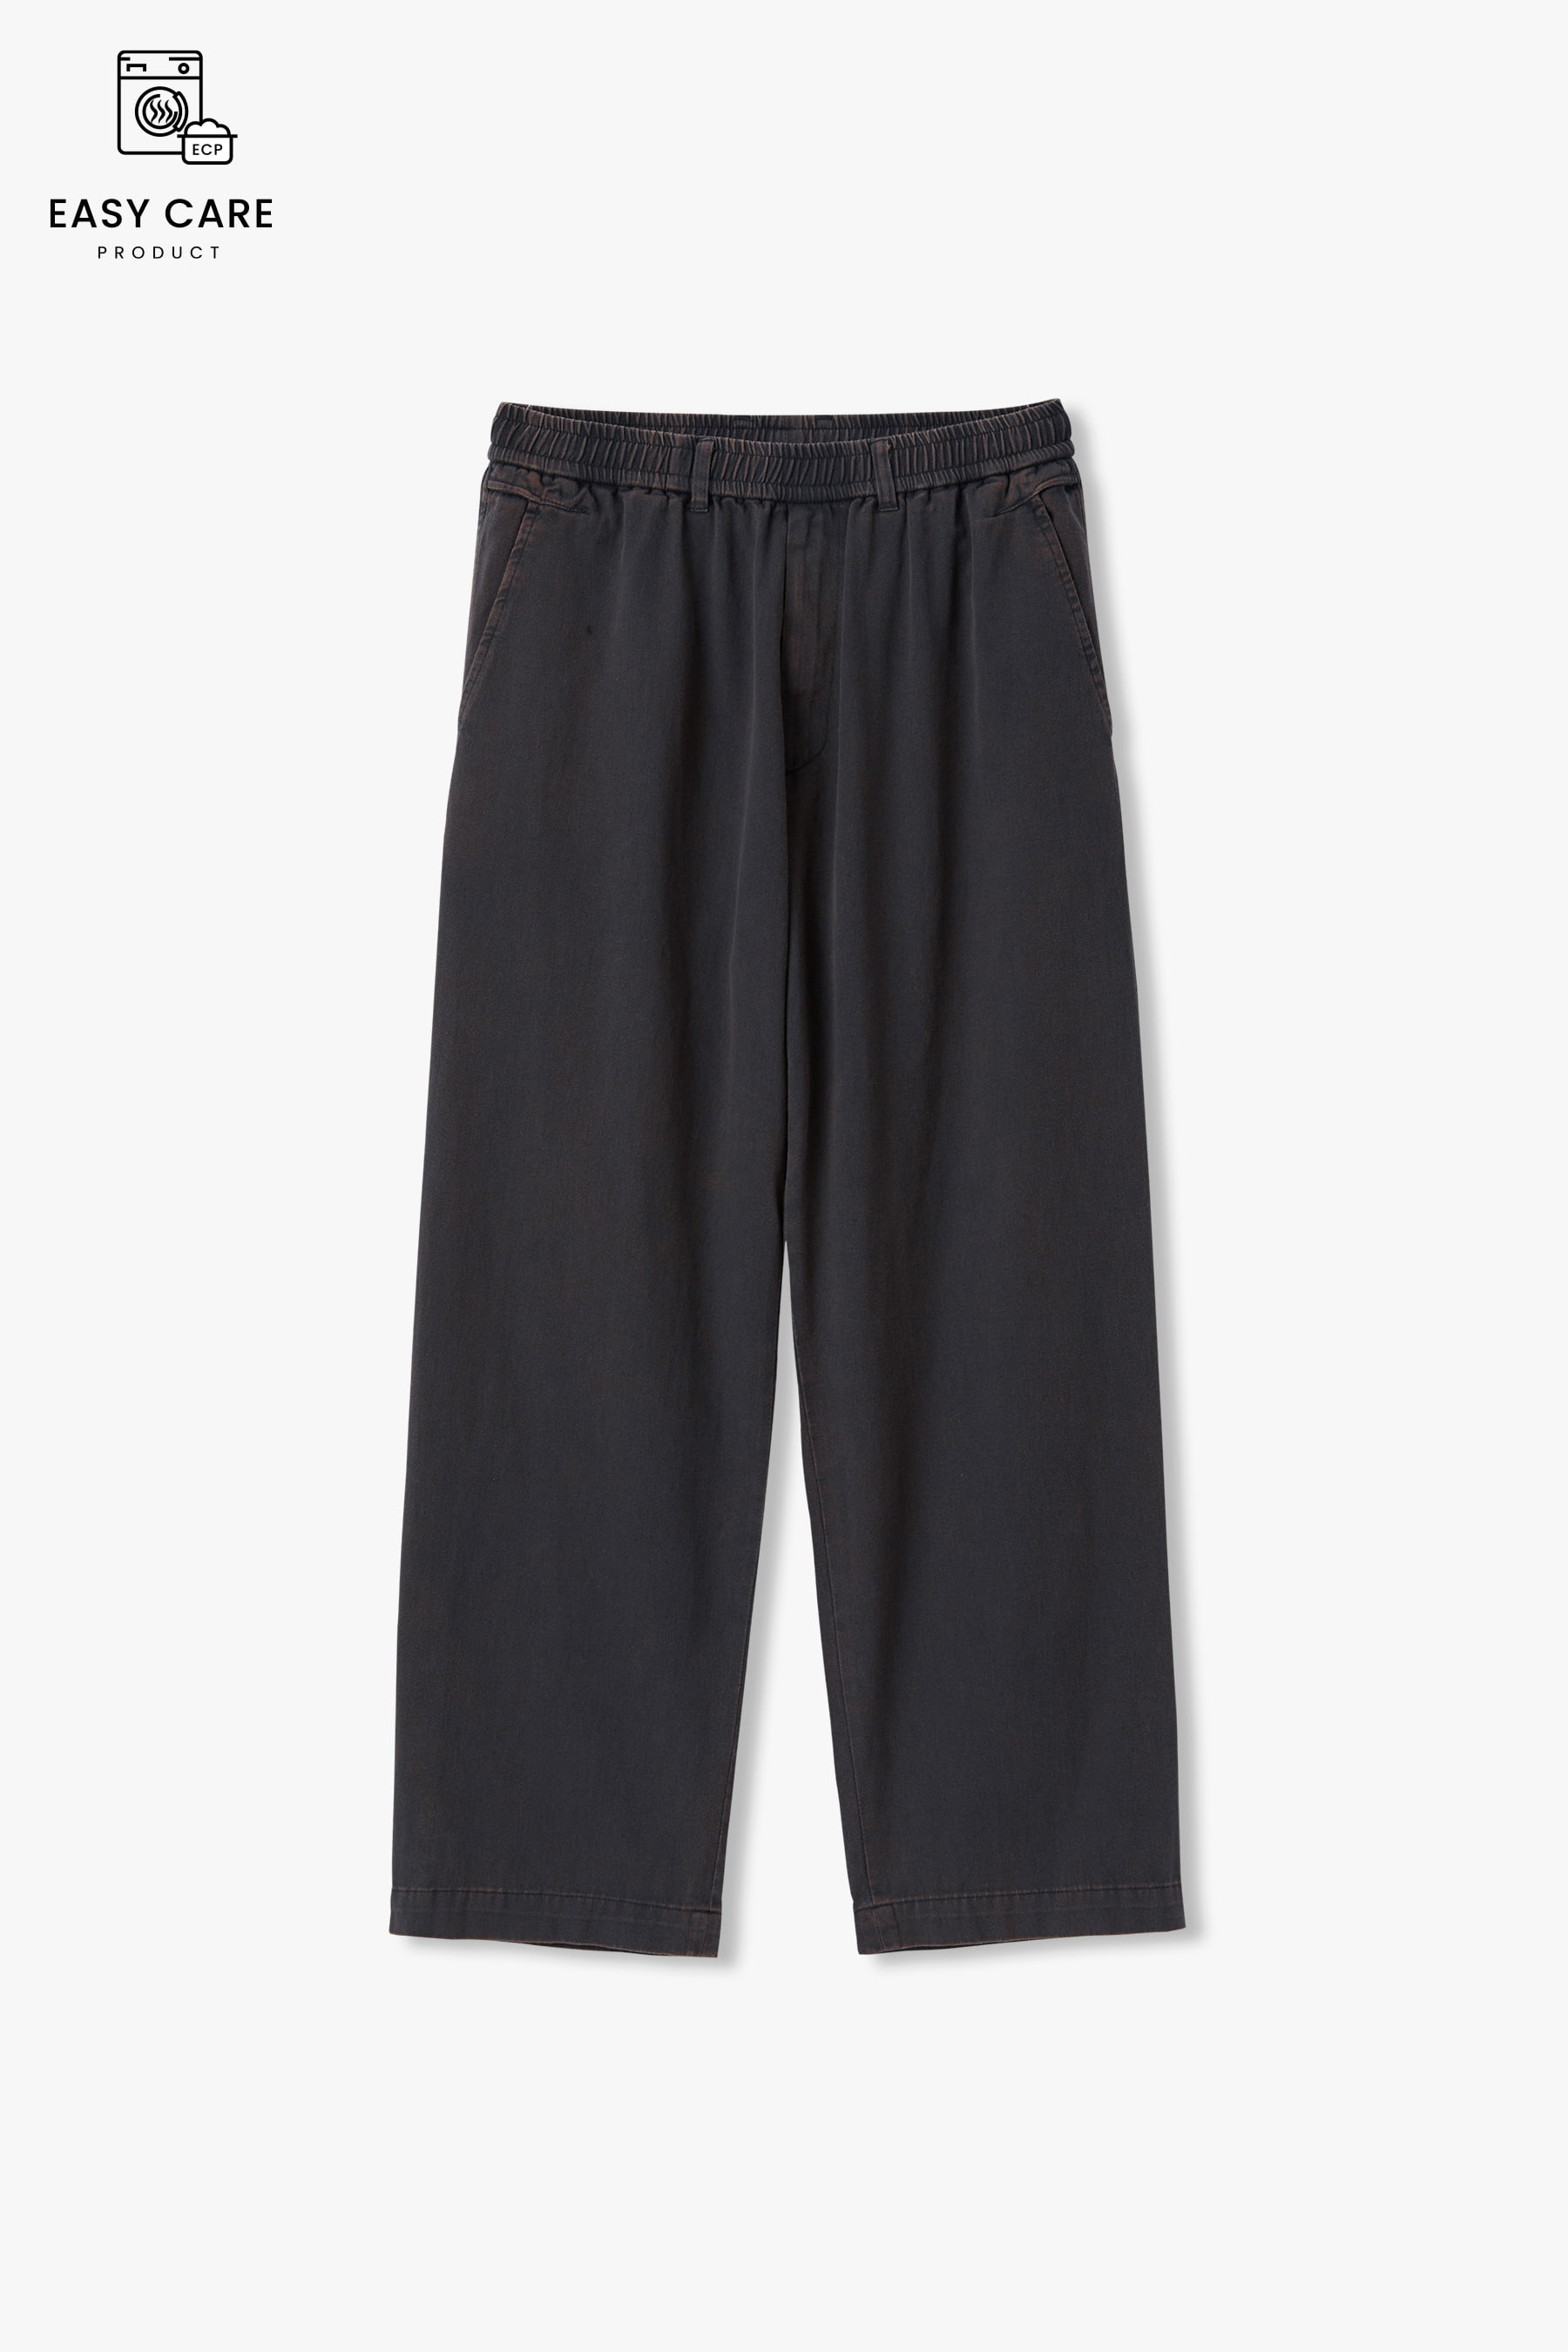 DUSTY NAVY W.L.B WASHED COTTON DRILL EASY PANTS (ECP GARMENT PROCESS)